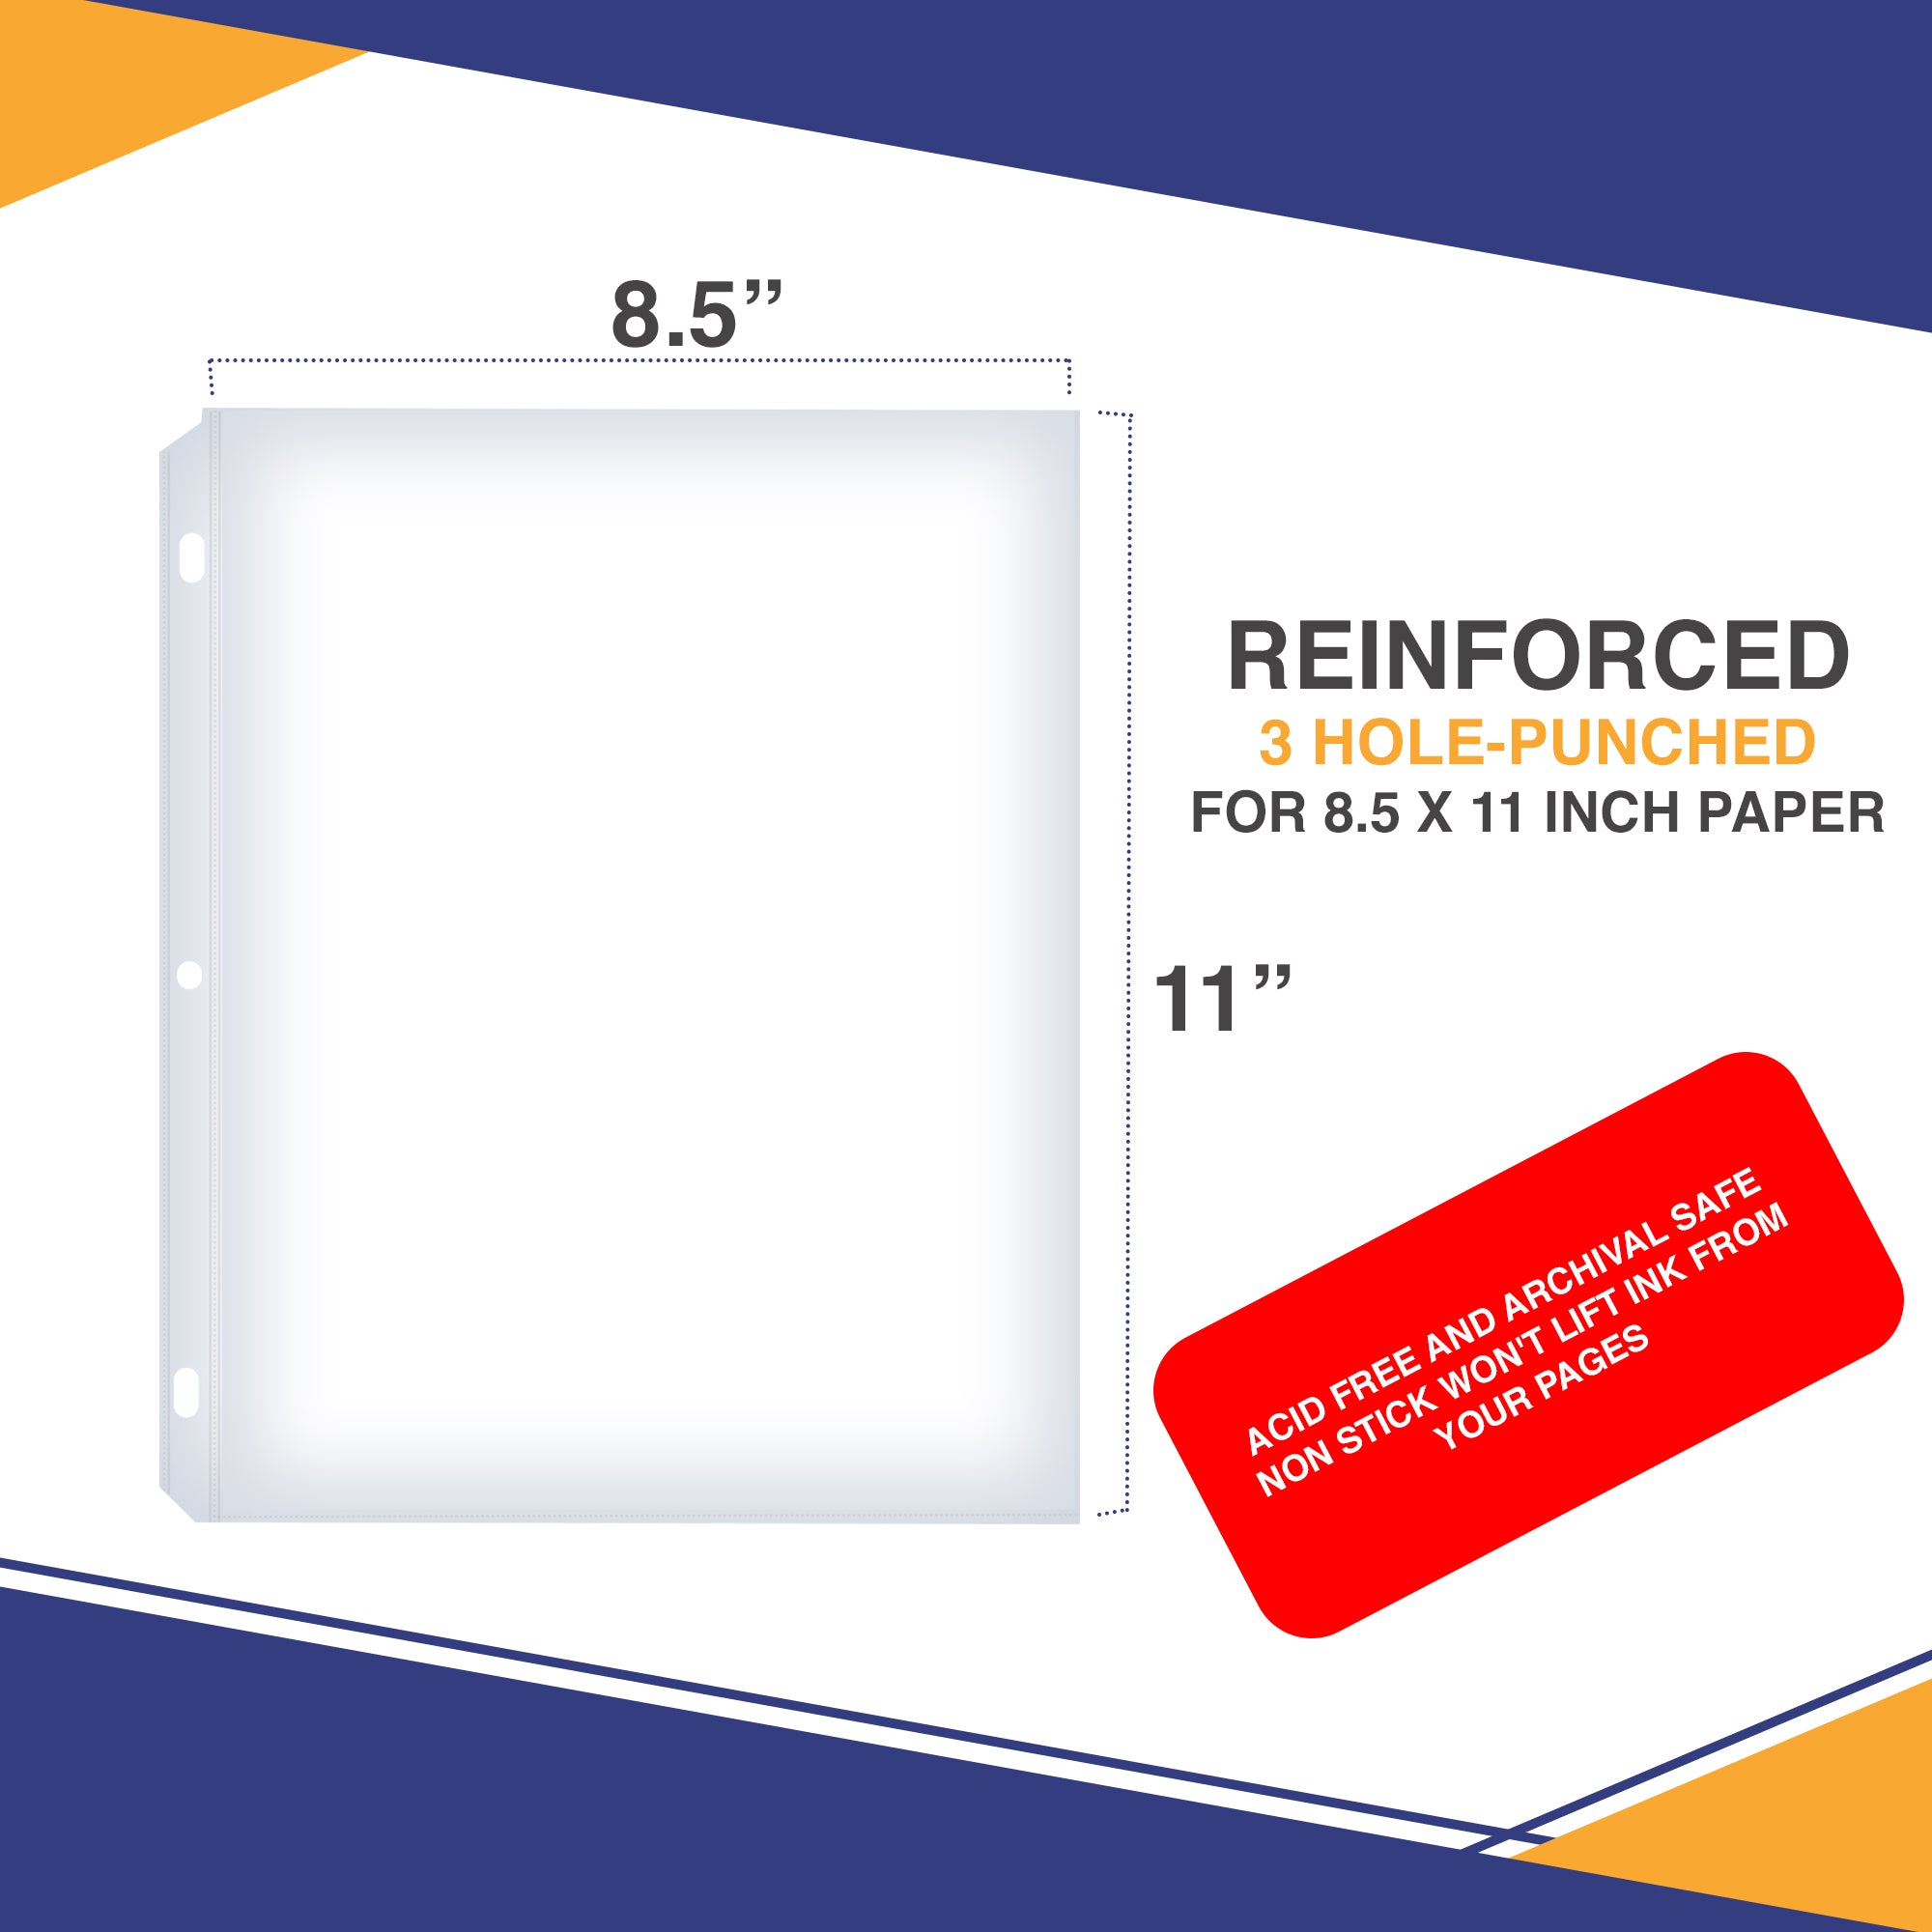 Heavy Duty Clear Sheet Protectors - 50 Pack, Reinforced Holes, 8.5 x 11 Inches, Acid Free/Archival Safe